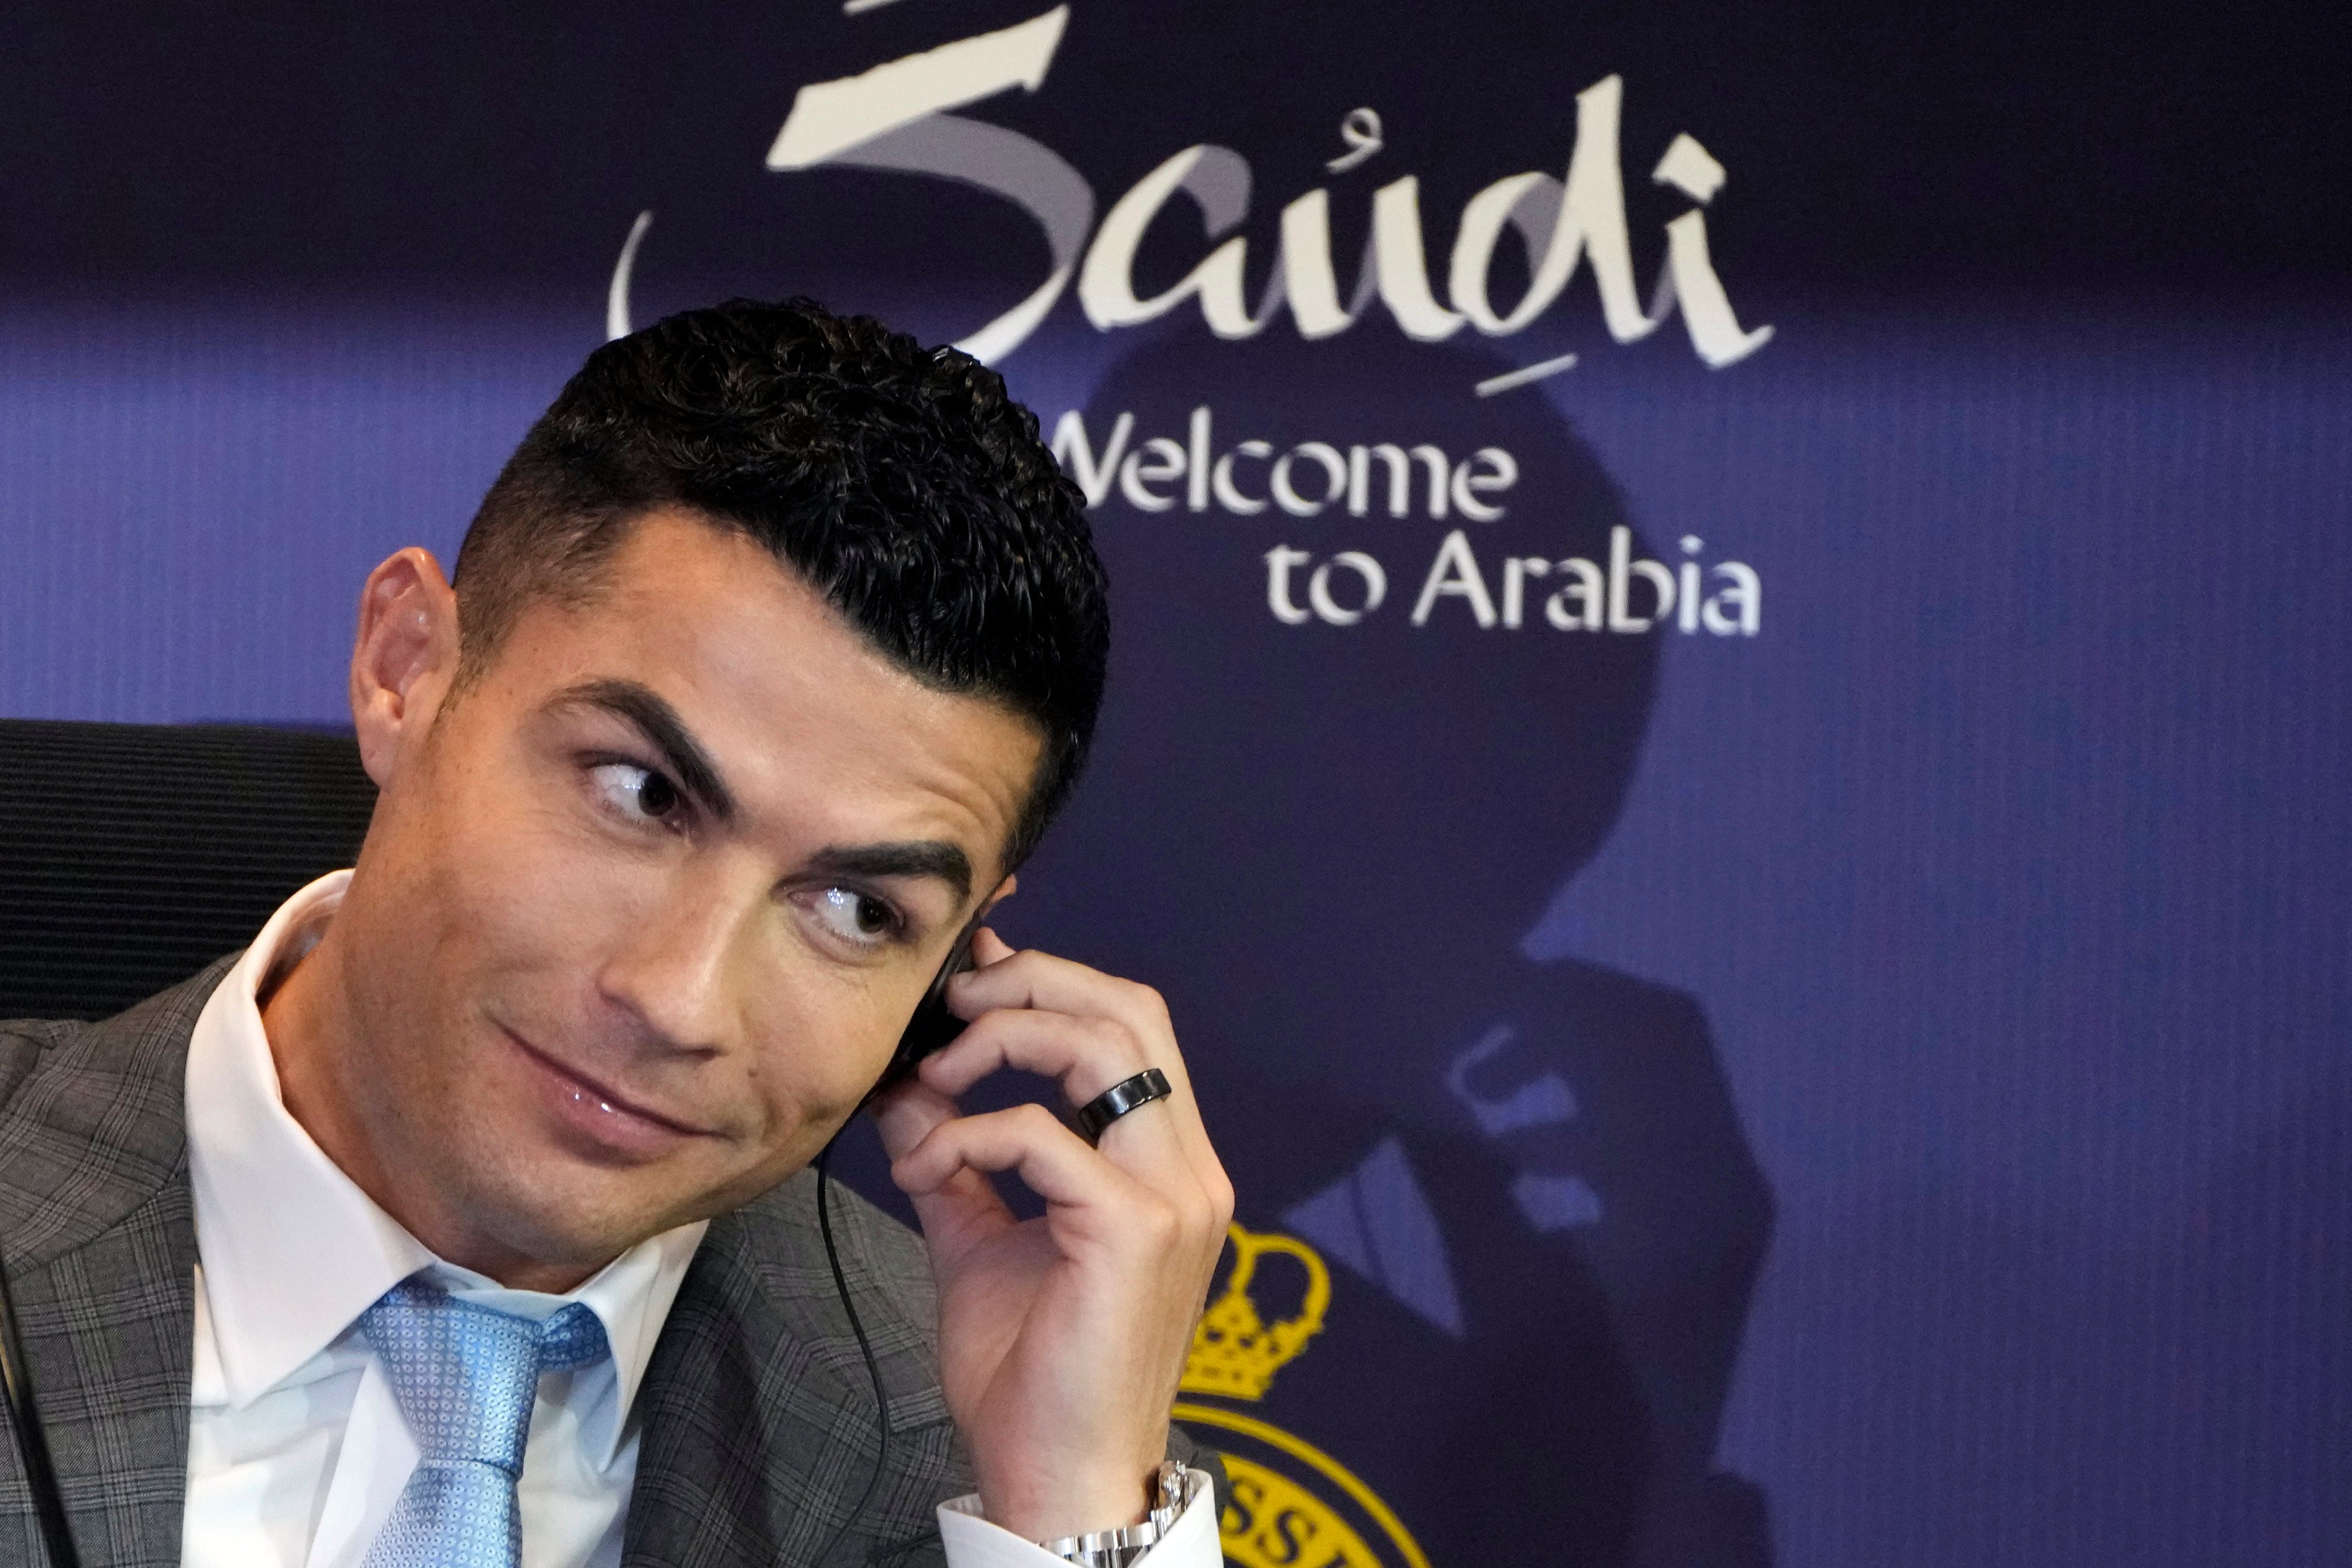 Cristiano Ronaldo listens to a question during a press conference for his official unveiling as a new member of Al Nassr football club in in Riyadh on January 3, 2023. Photo: AP